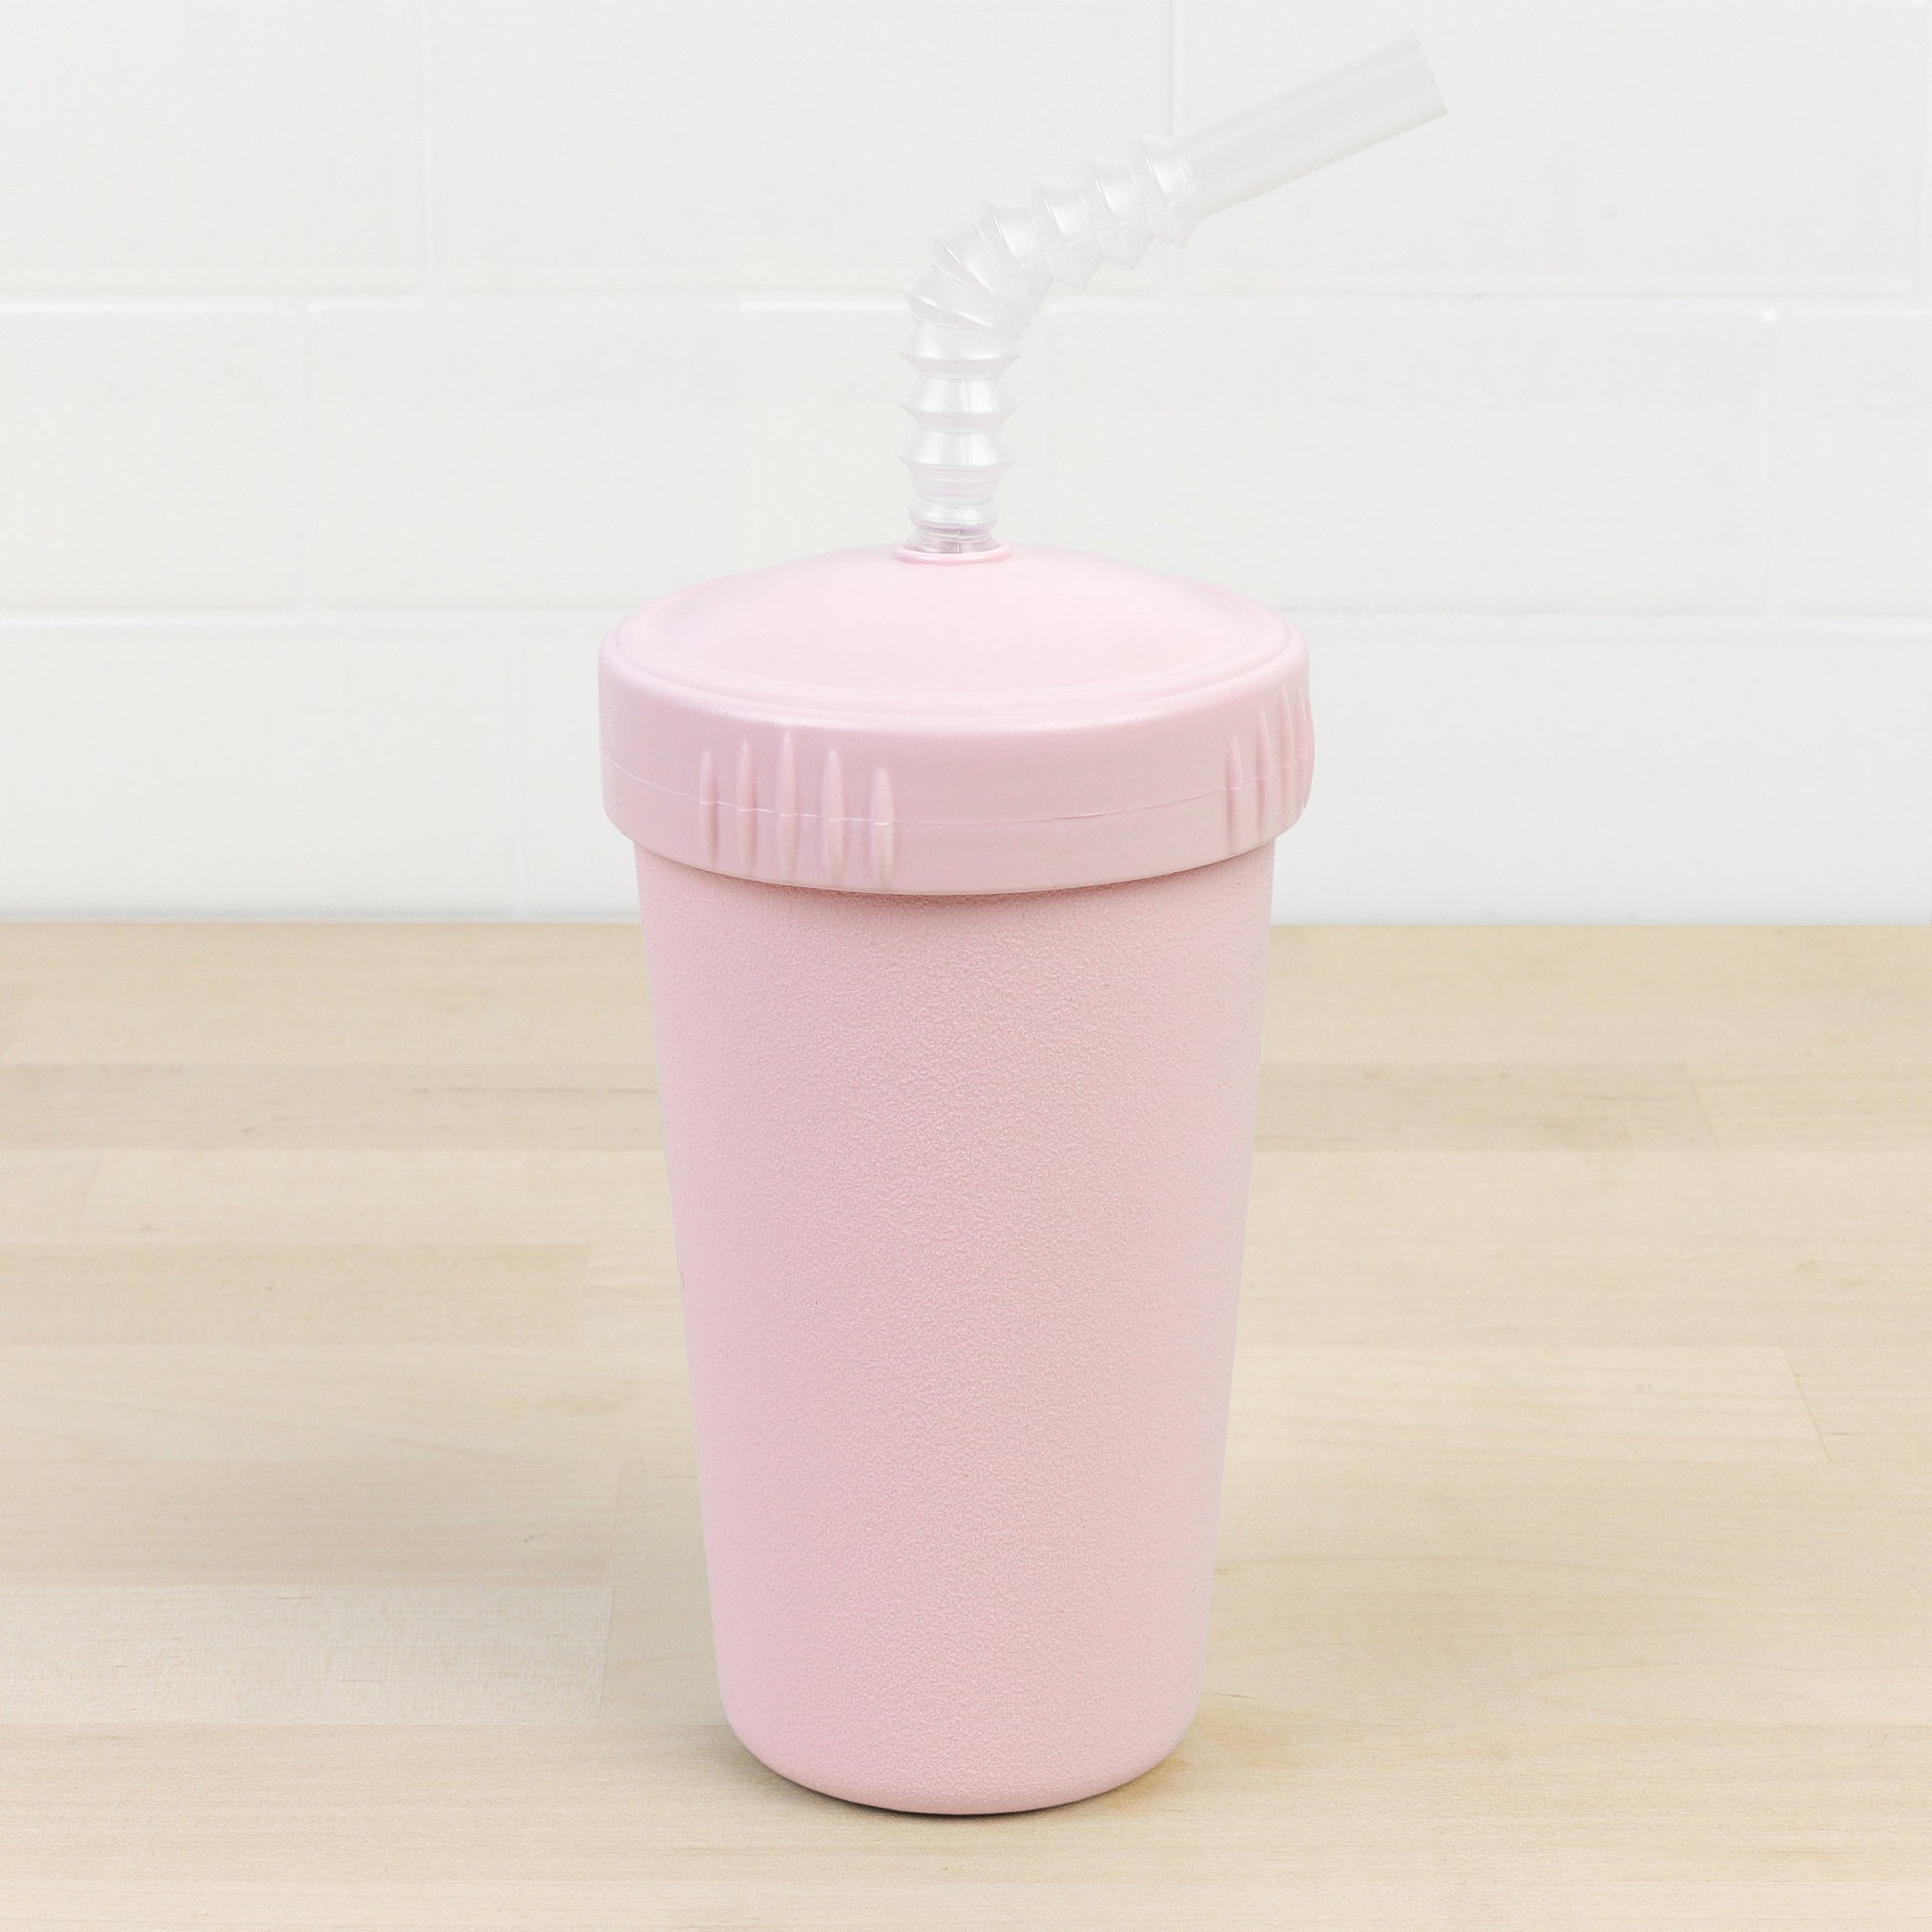 Re-Play Straw Cup in Ice Pink from Bear & Moo